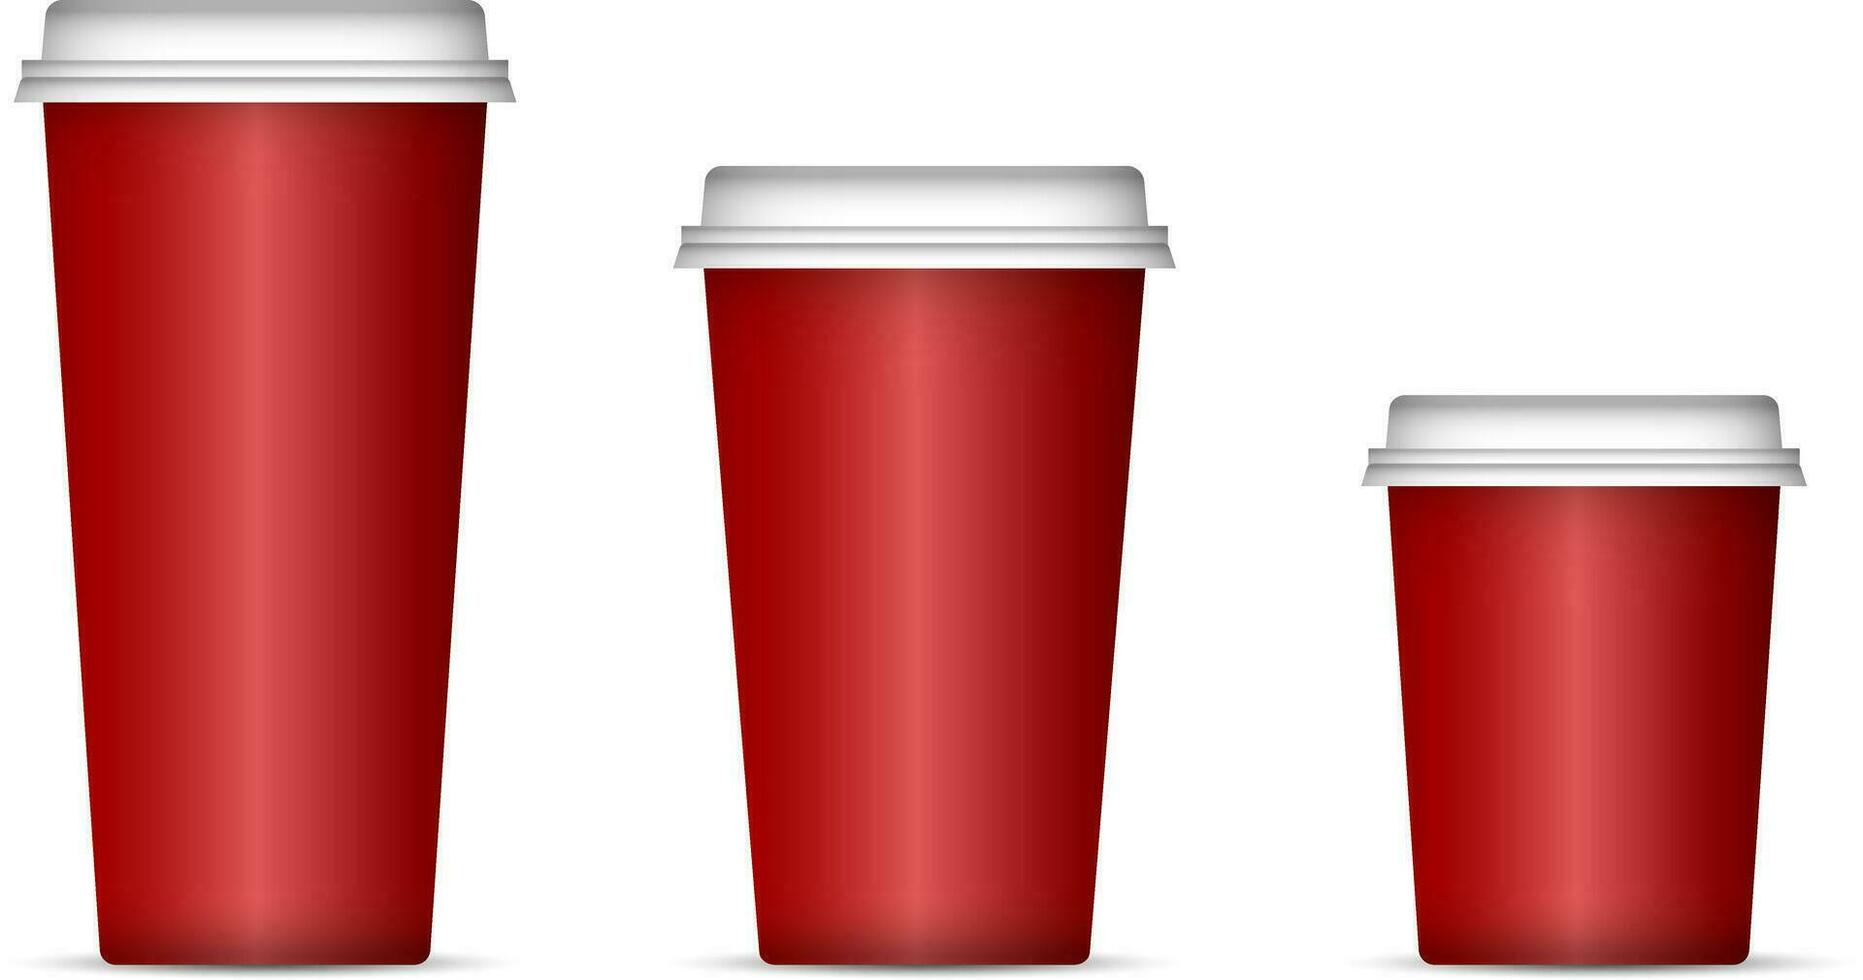 Mockup of red Paper cups for coffee or tea with lid. Realistic 3d vector illustration isolated on white background.